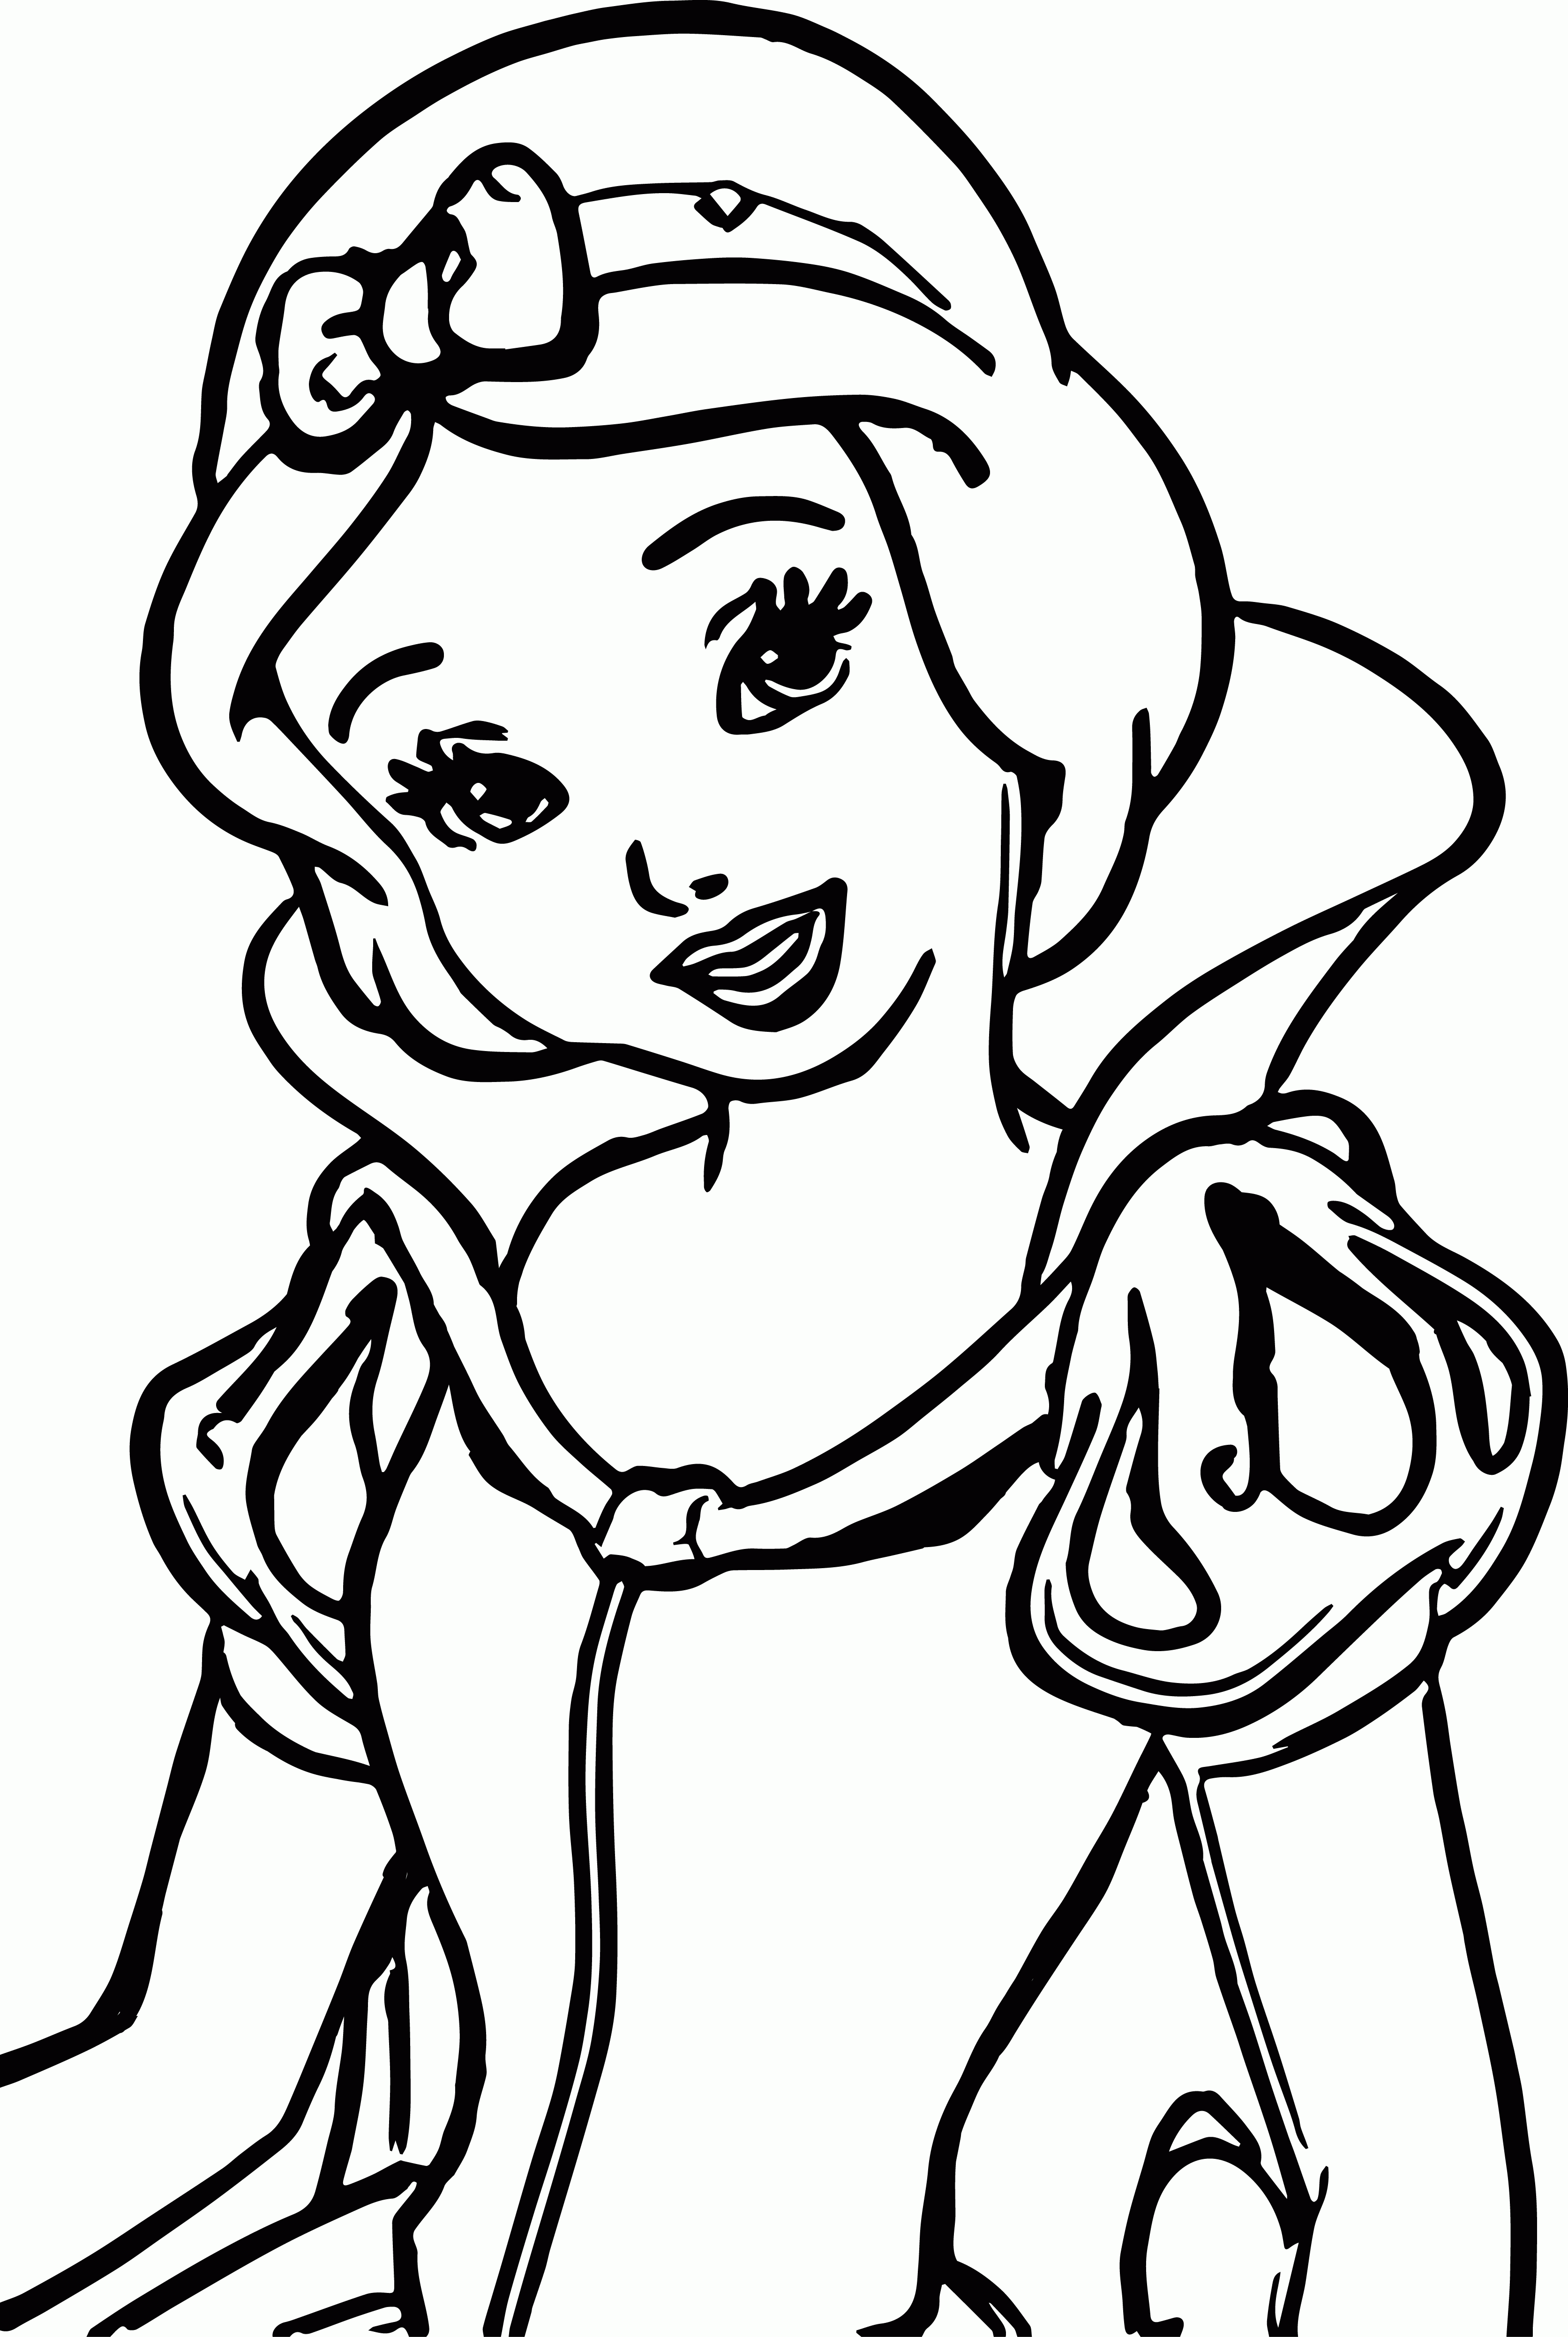 Cartoon Disney Princesses Coloring Pages - Coloring Home